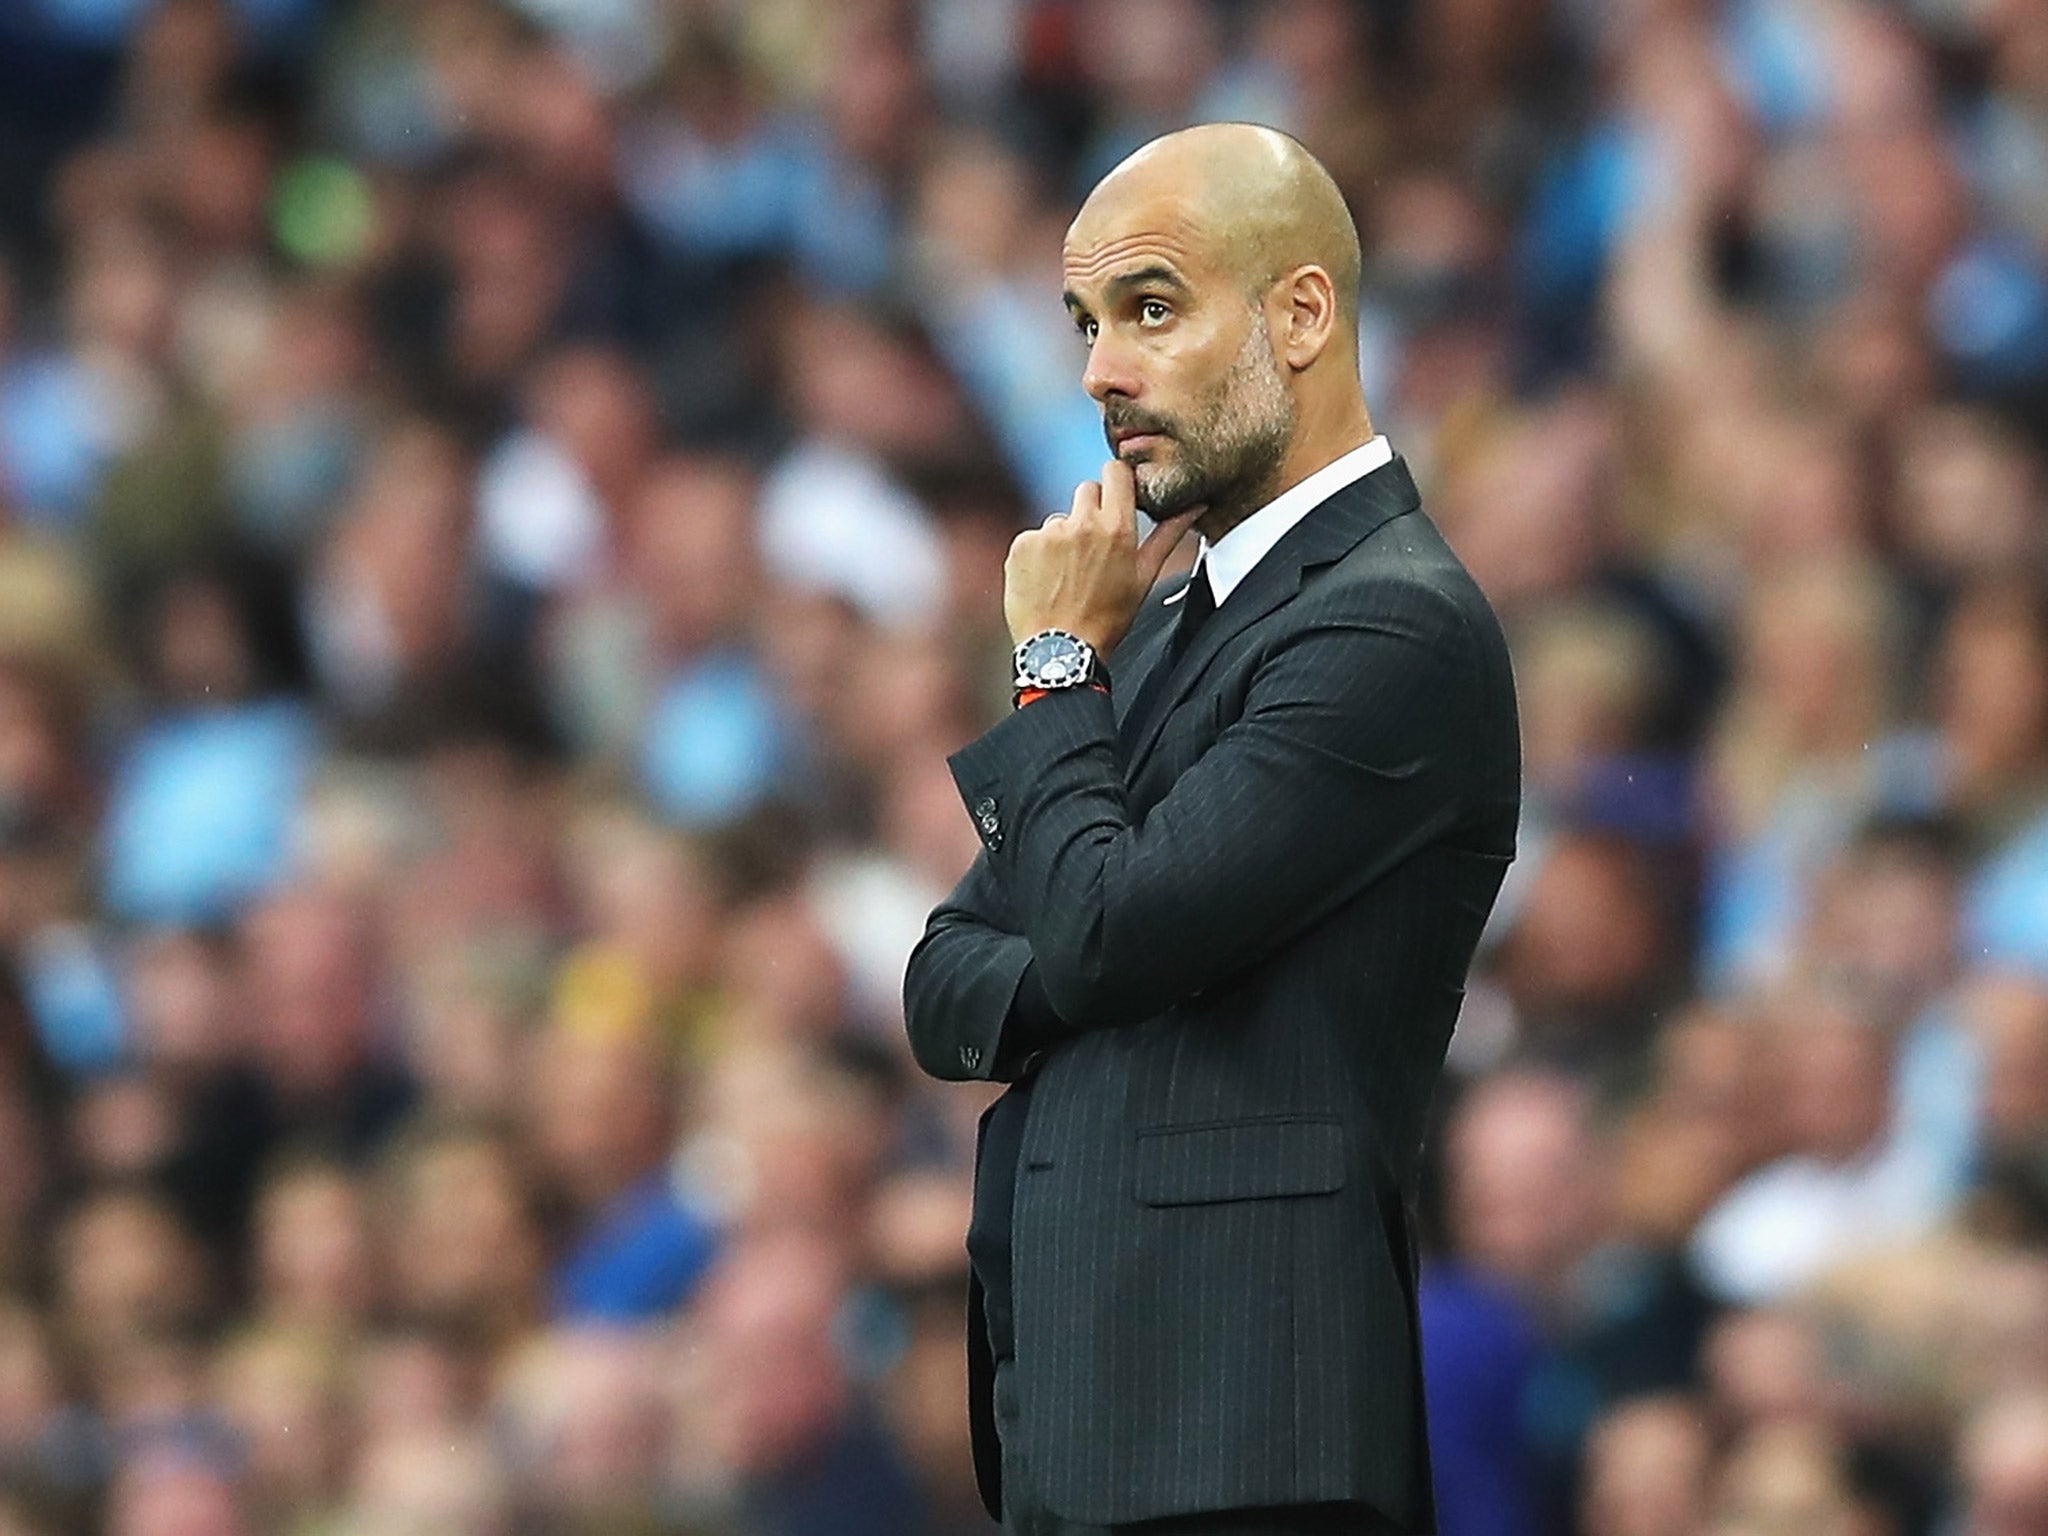 Mino Raiola has launched a scathing verbal attack on Pep Guardiola